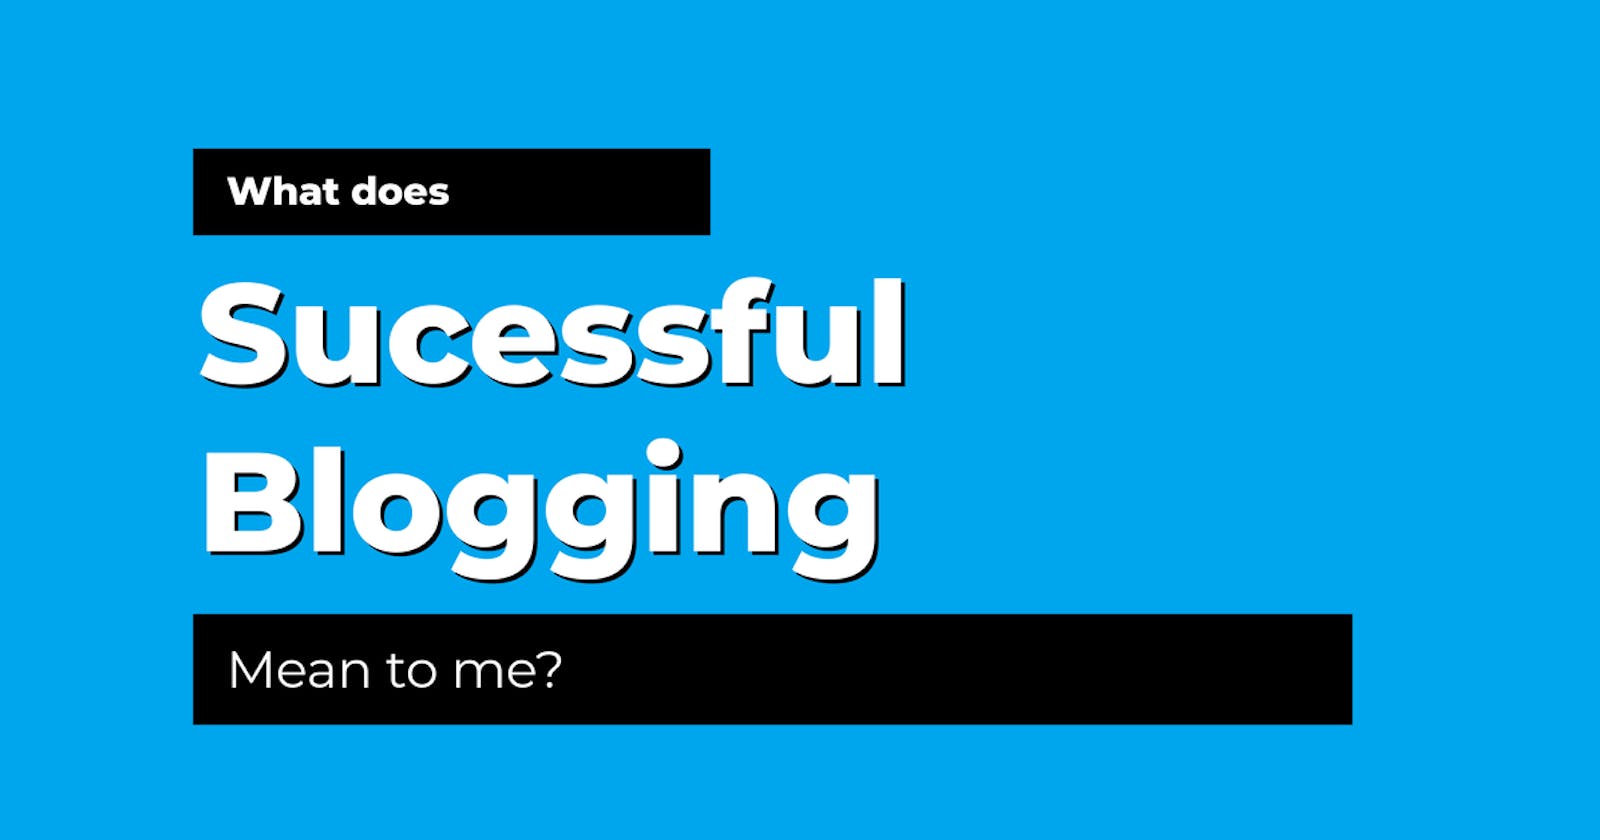 What does successful blogging mean?